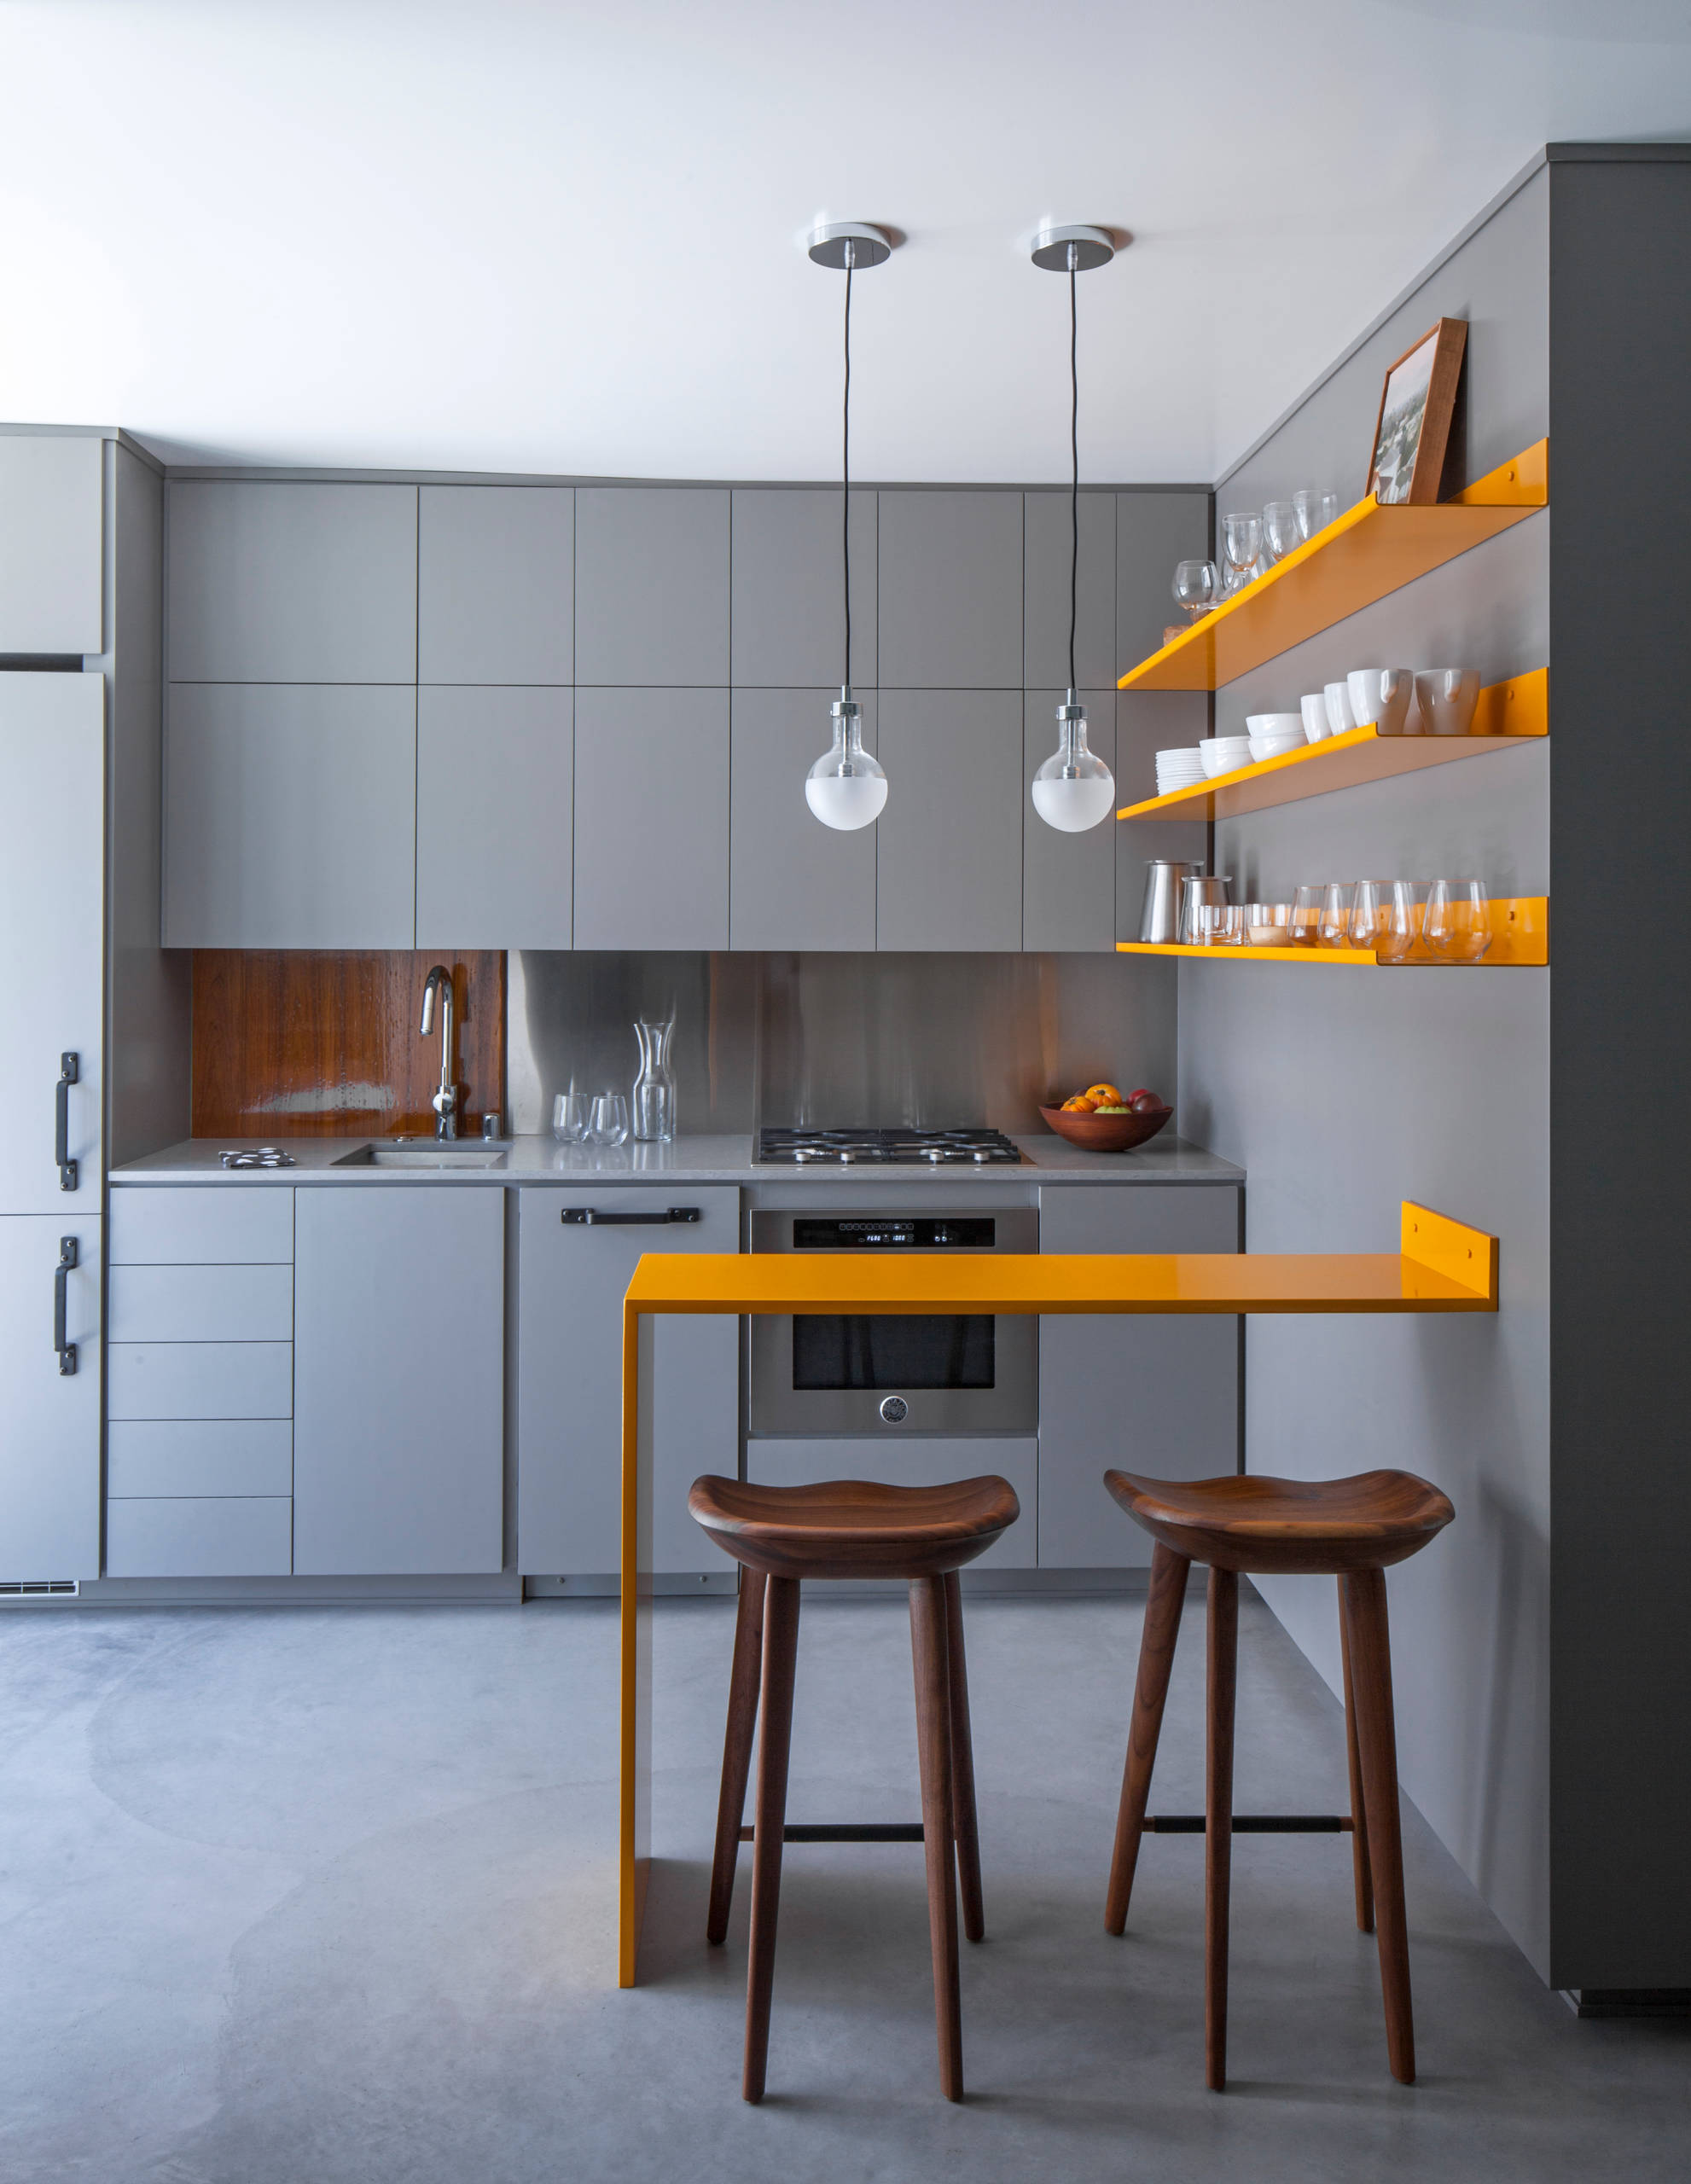 20 Small Kitchen Ideas You'll Love   June, 20   Houzz